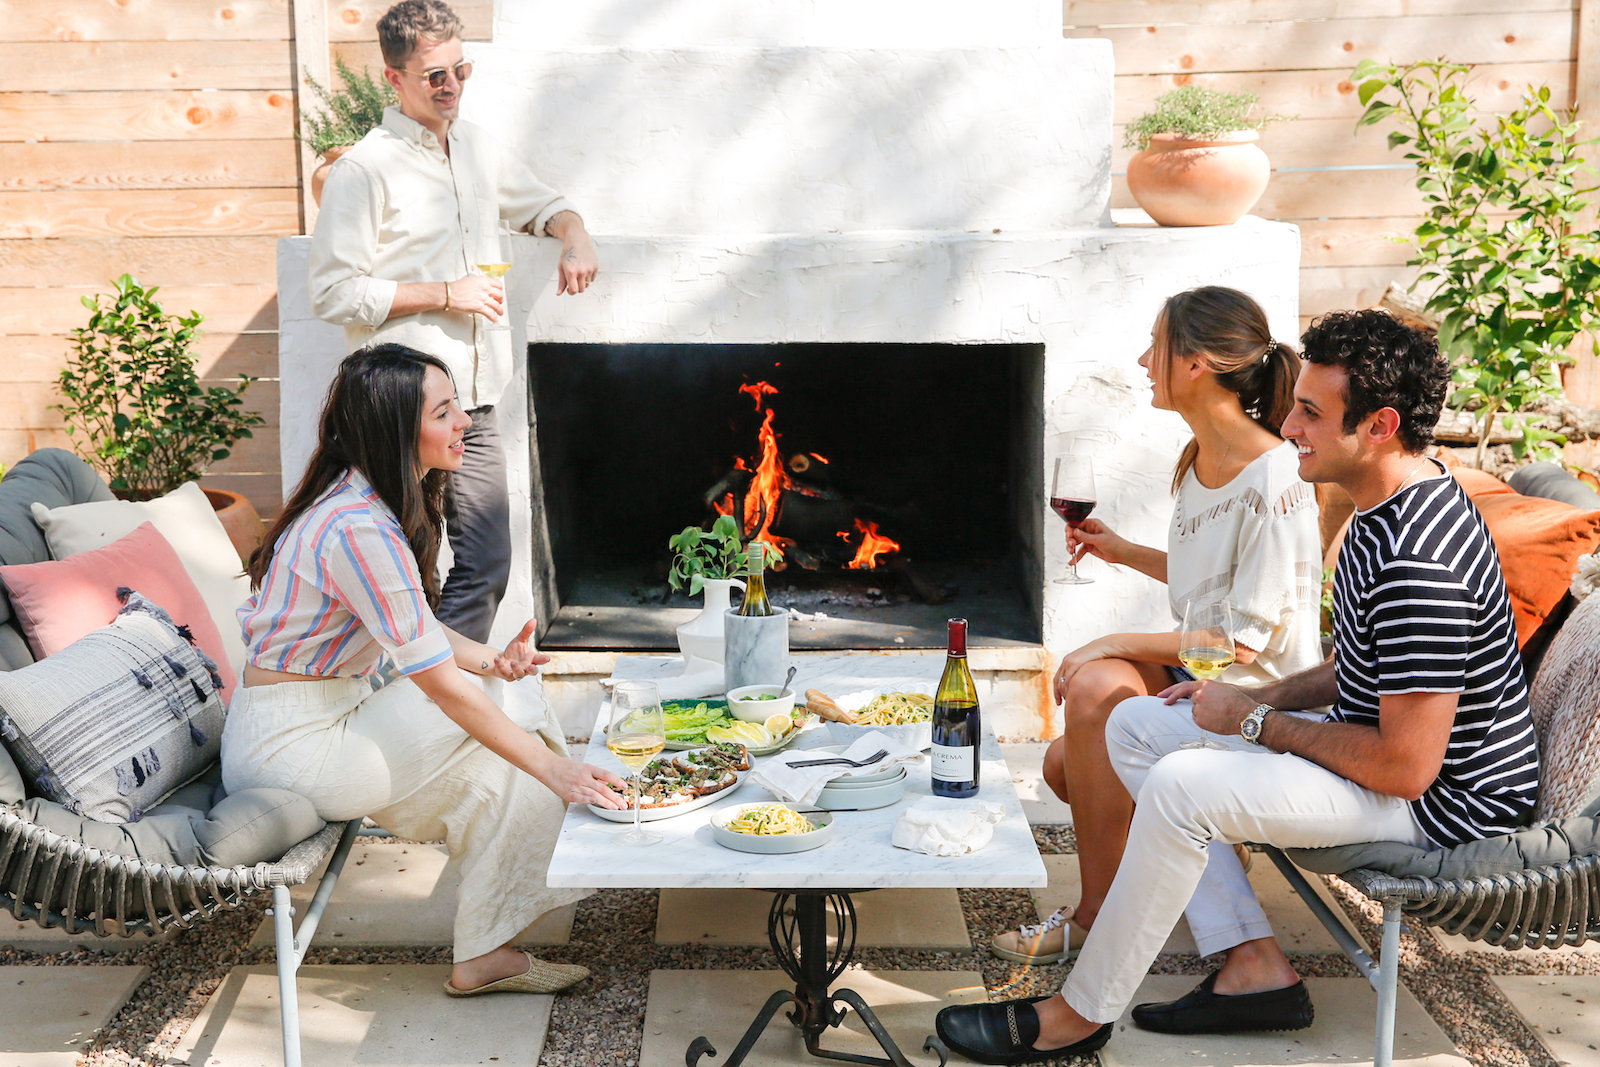 Let us help you curate the perfect patio dinner party setting! How